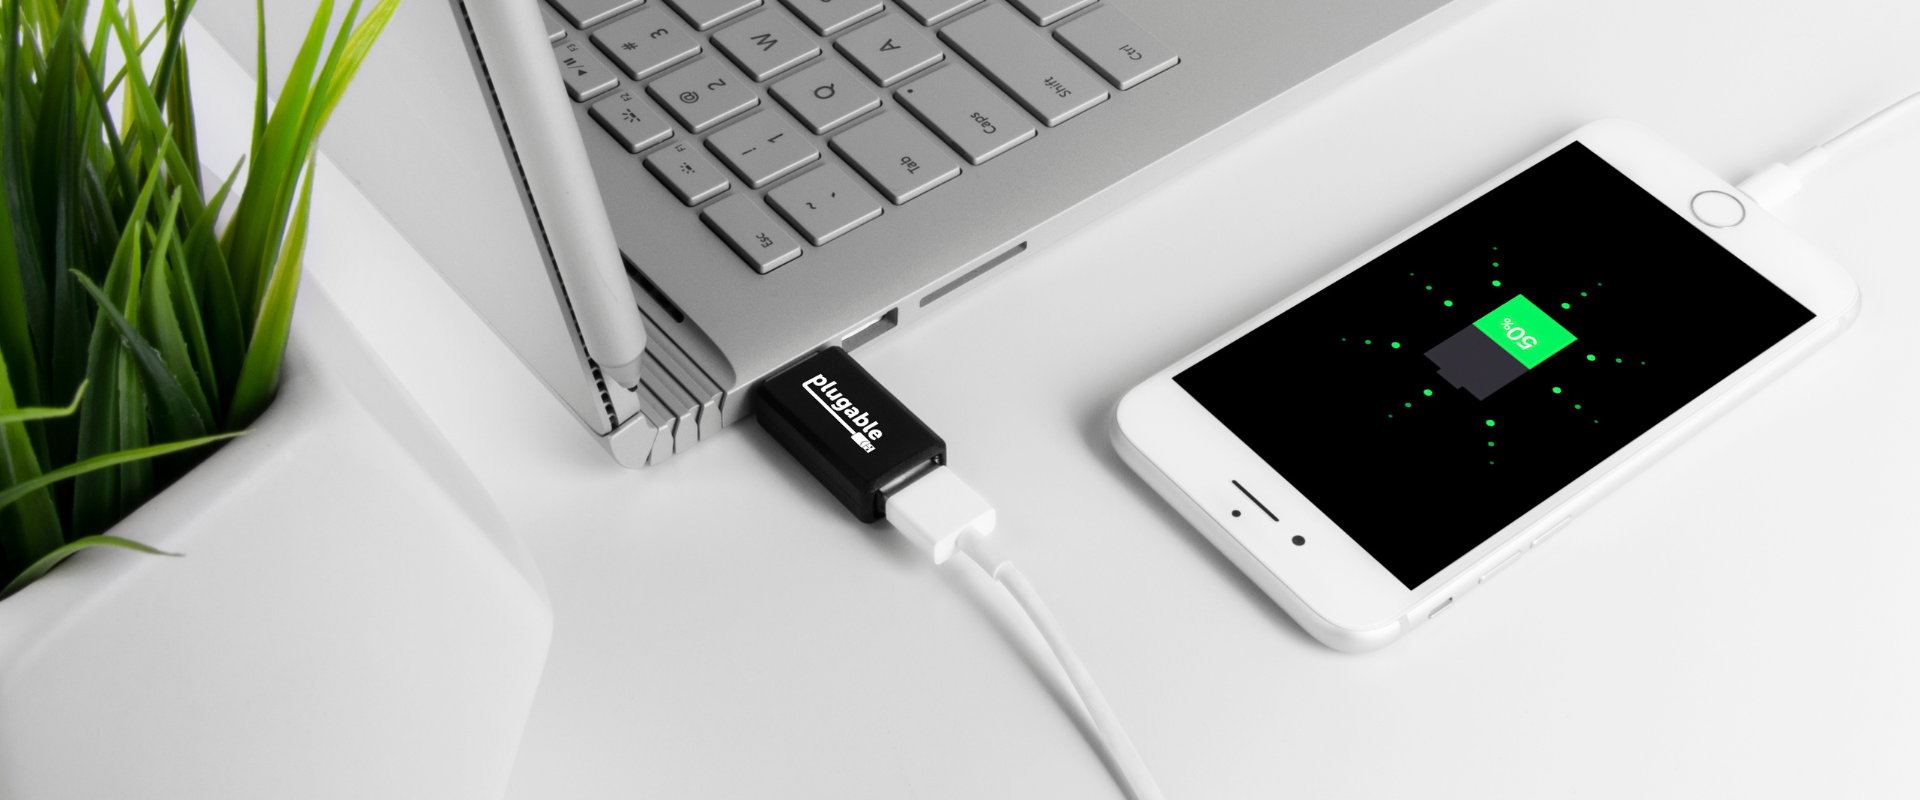 Plugable USB-MC1 used to charge mobile device on laptop